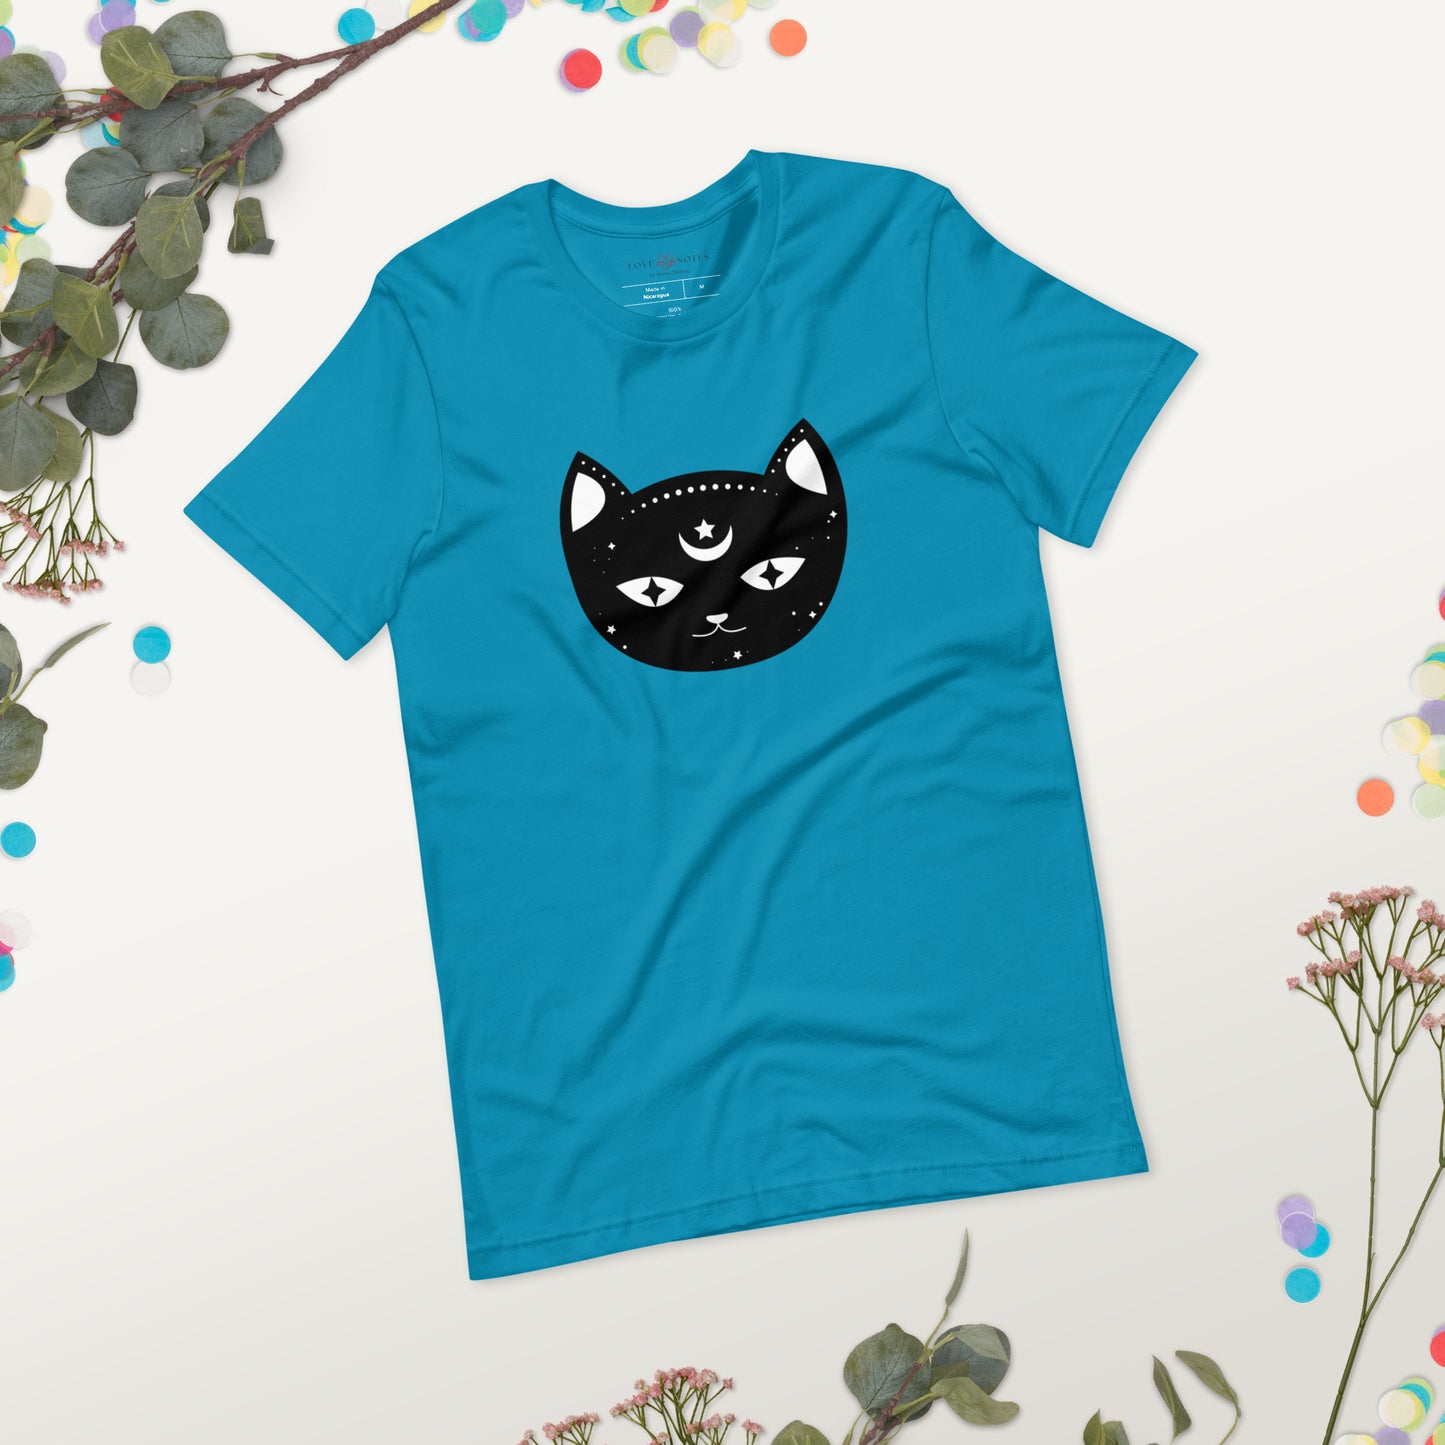 Unisex Tee: Black Cat Face with Crescent Moon and Star